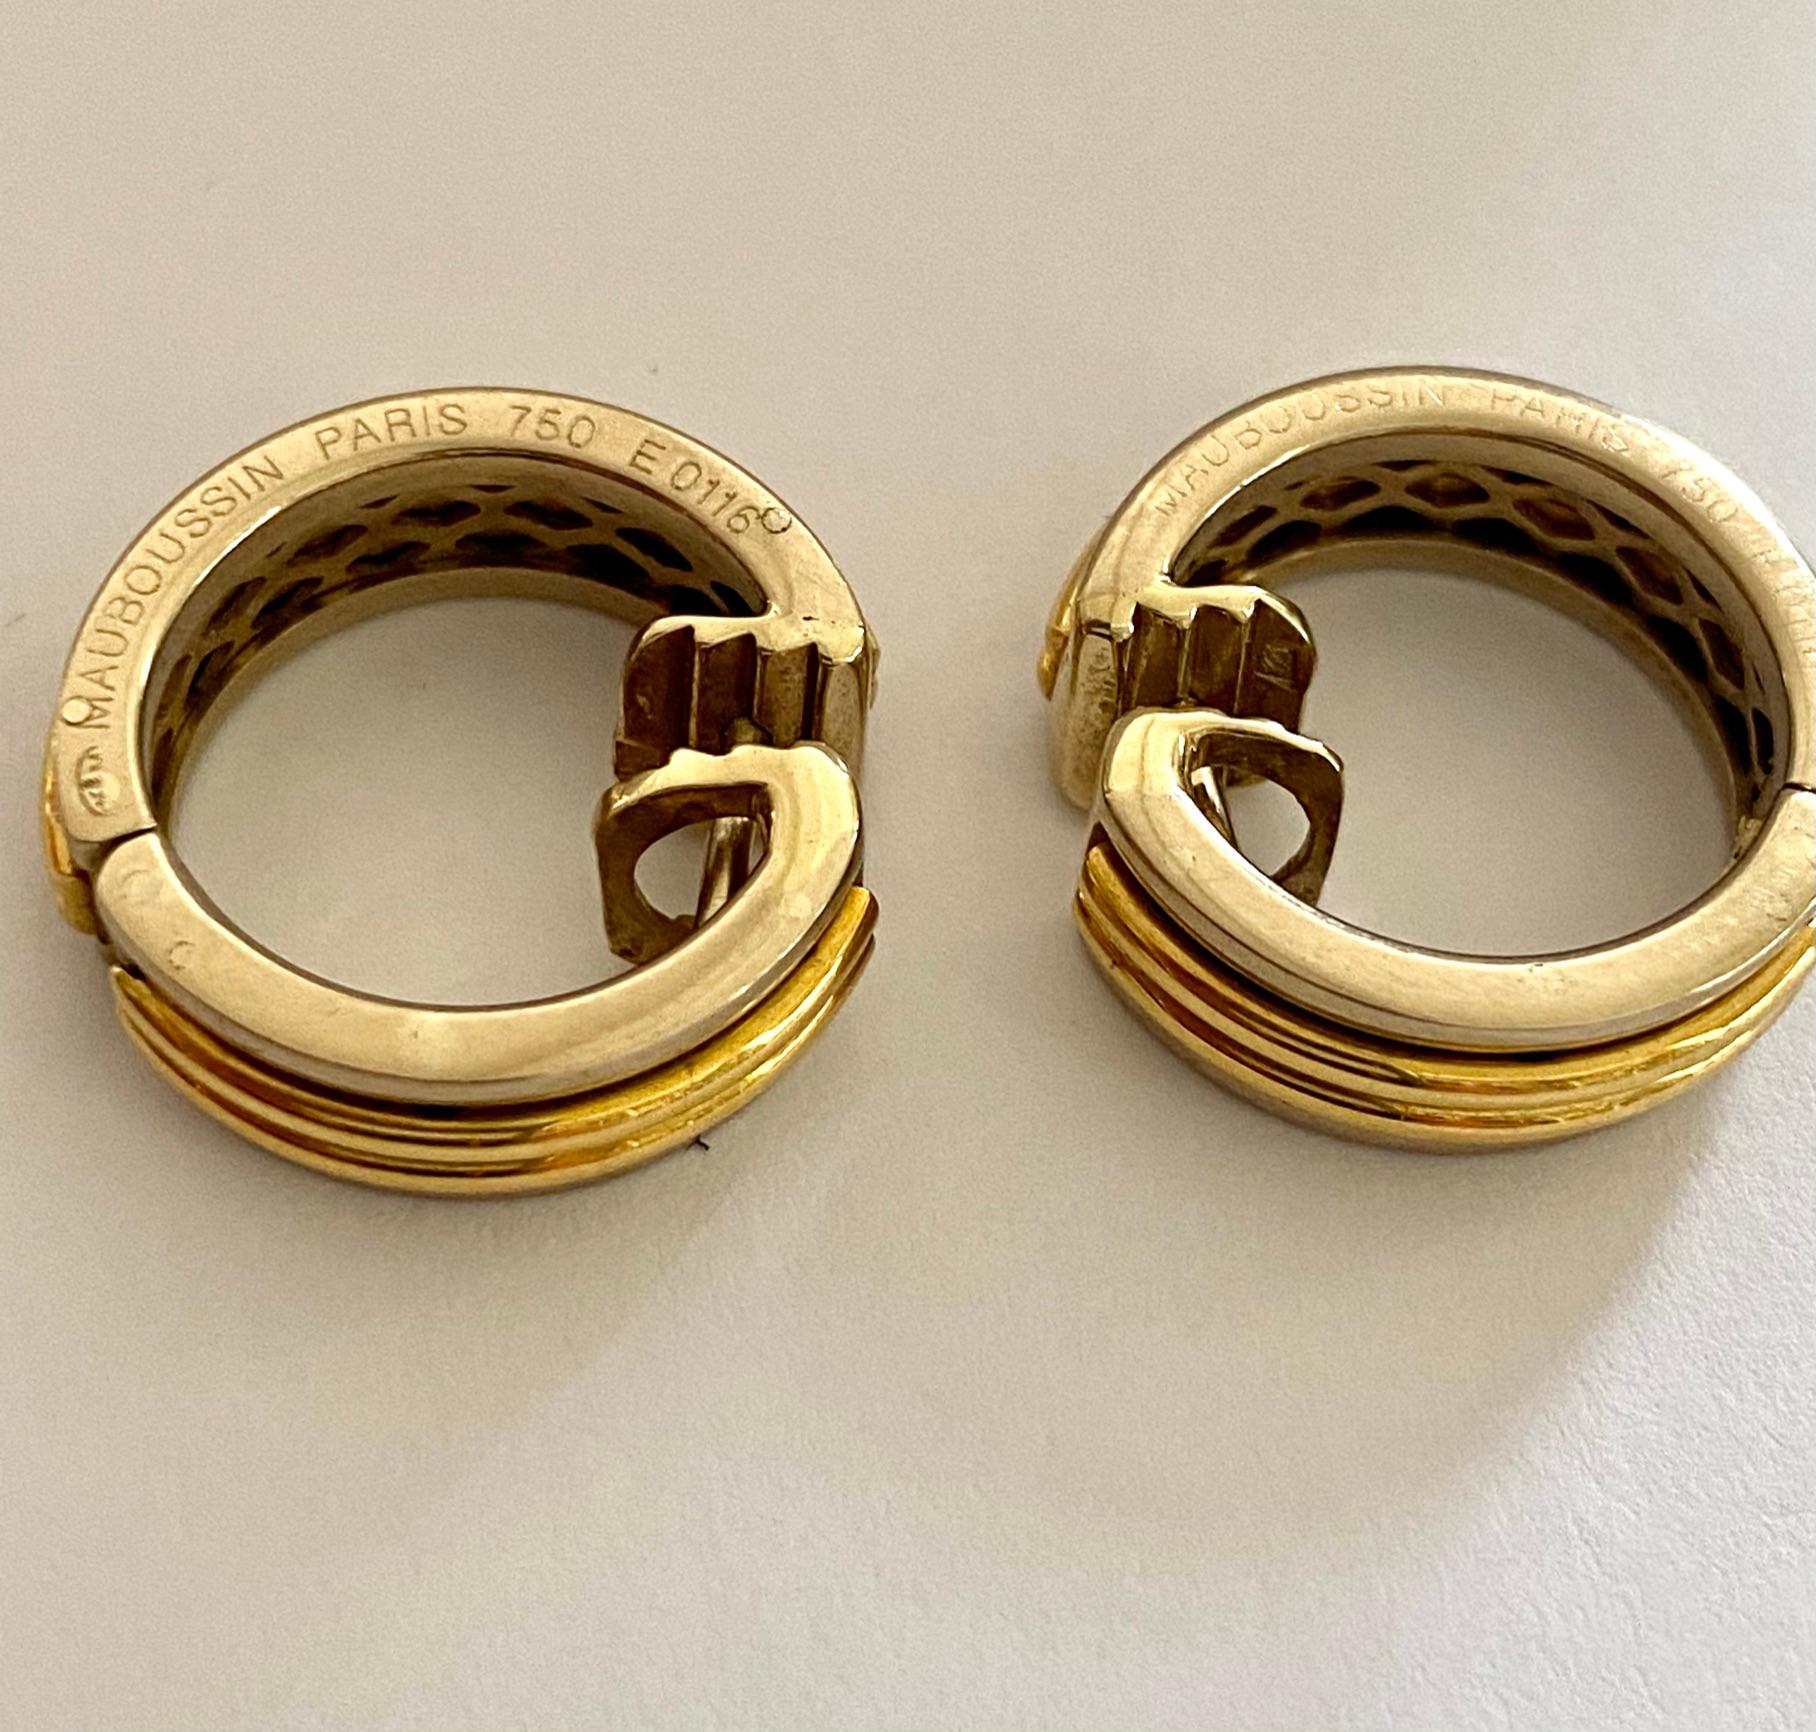 One (1) pair of 18K. white and yellow gold ear clips, Creole model. Can also be worn without ear holes!
signed: Mauboussin Paris nr E0116
size: 17 mm round, wide: 5 mm, thick: 2 mm
Made around 2000